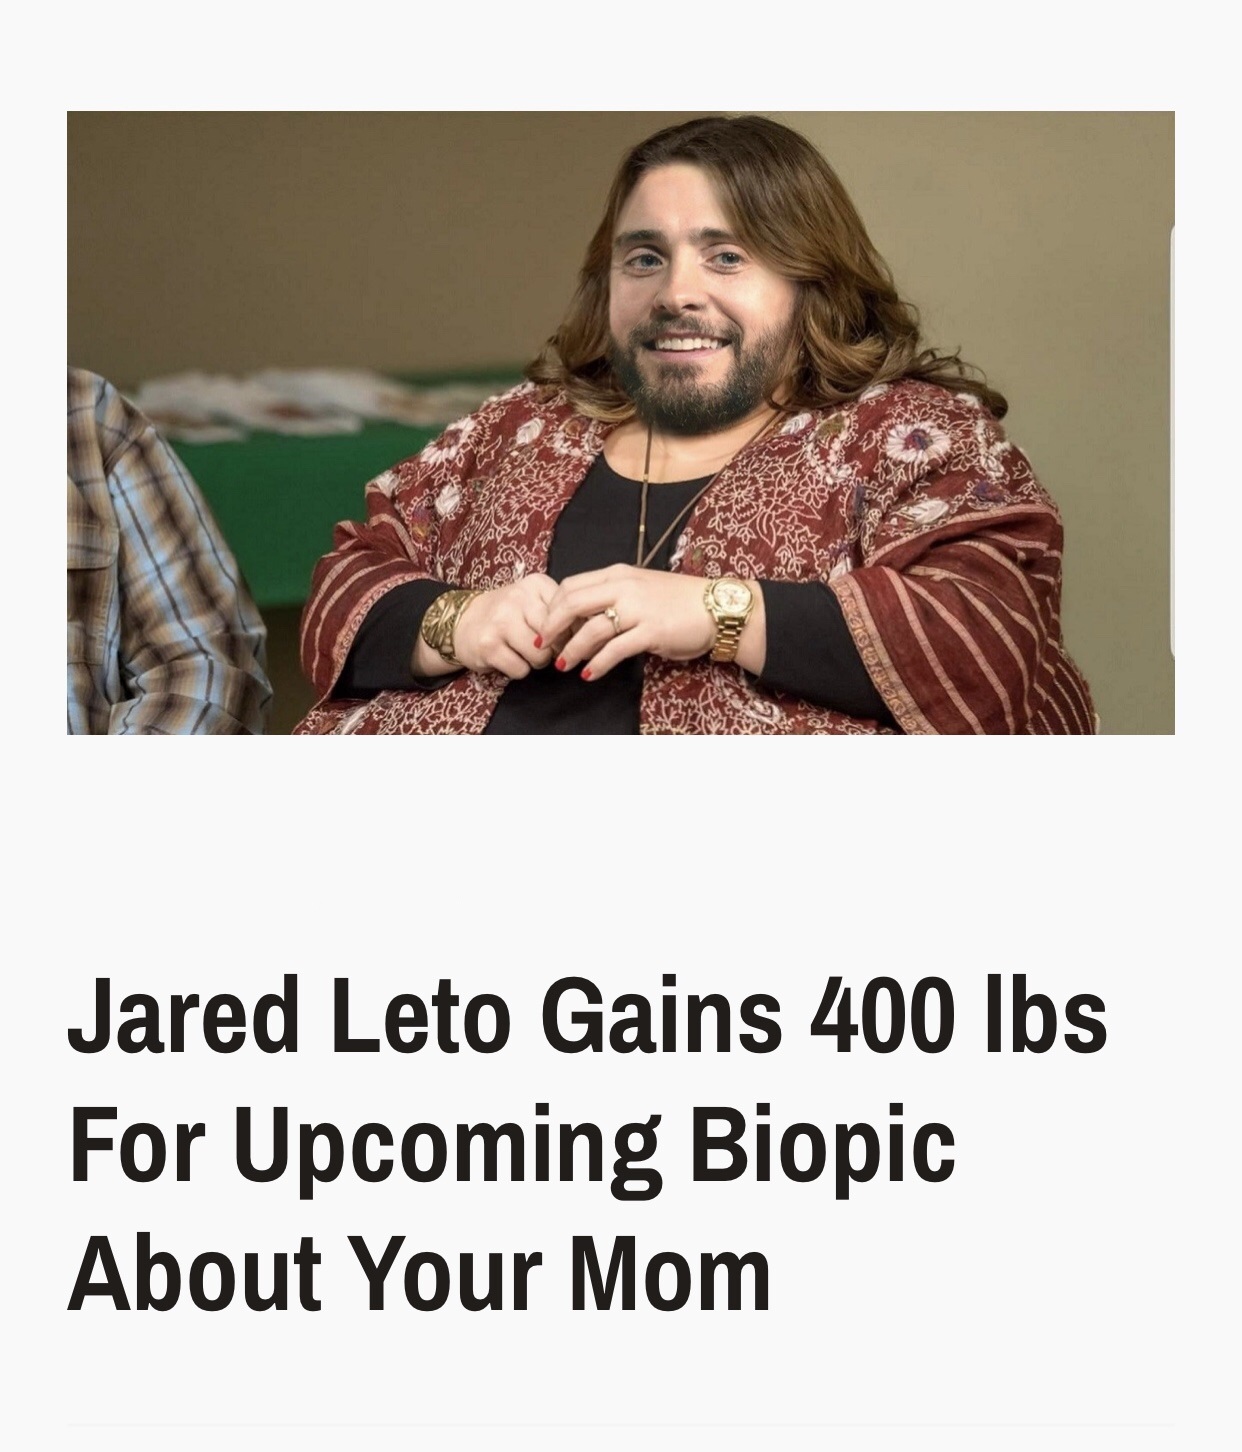 beard - Vasa coon Jared Leto Gains 400 lbs For Upcoming Biopic About Your Mom